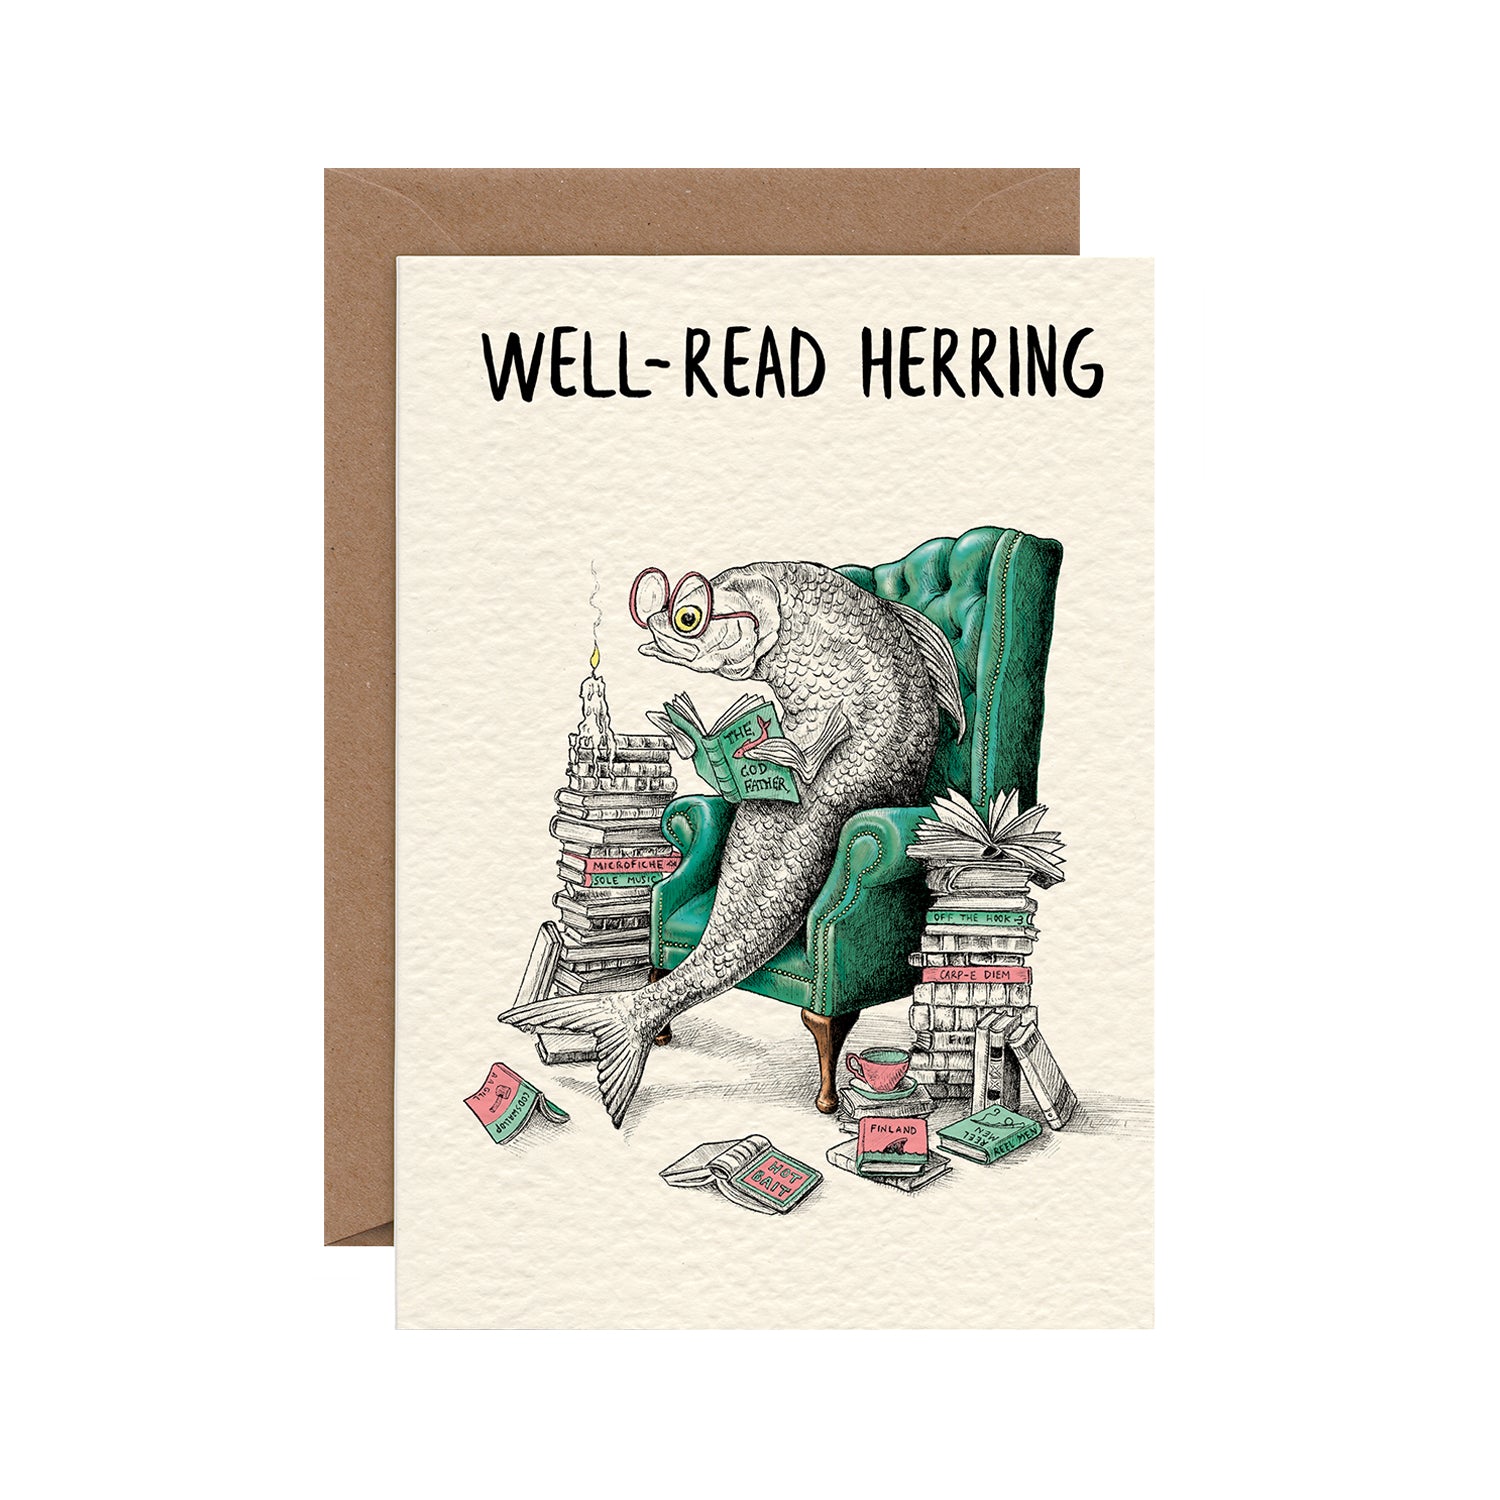 A funny illustration of a bespectacled fish in a green easy chair reading a book, surrounded by piles of books and a lit candle, under the caption &quot;WELL-READ HERRING&quot;.